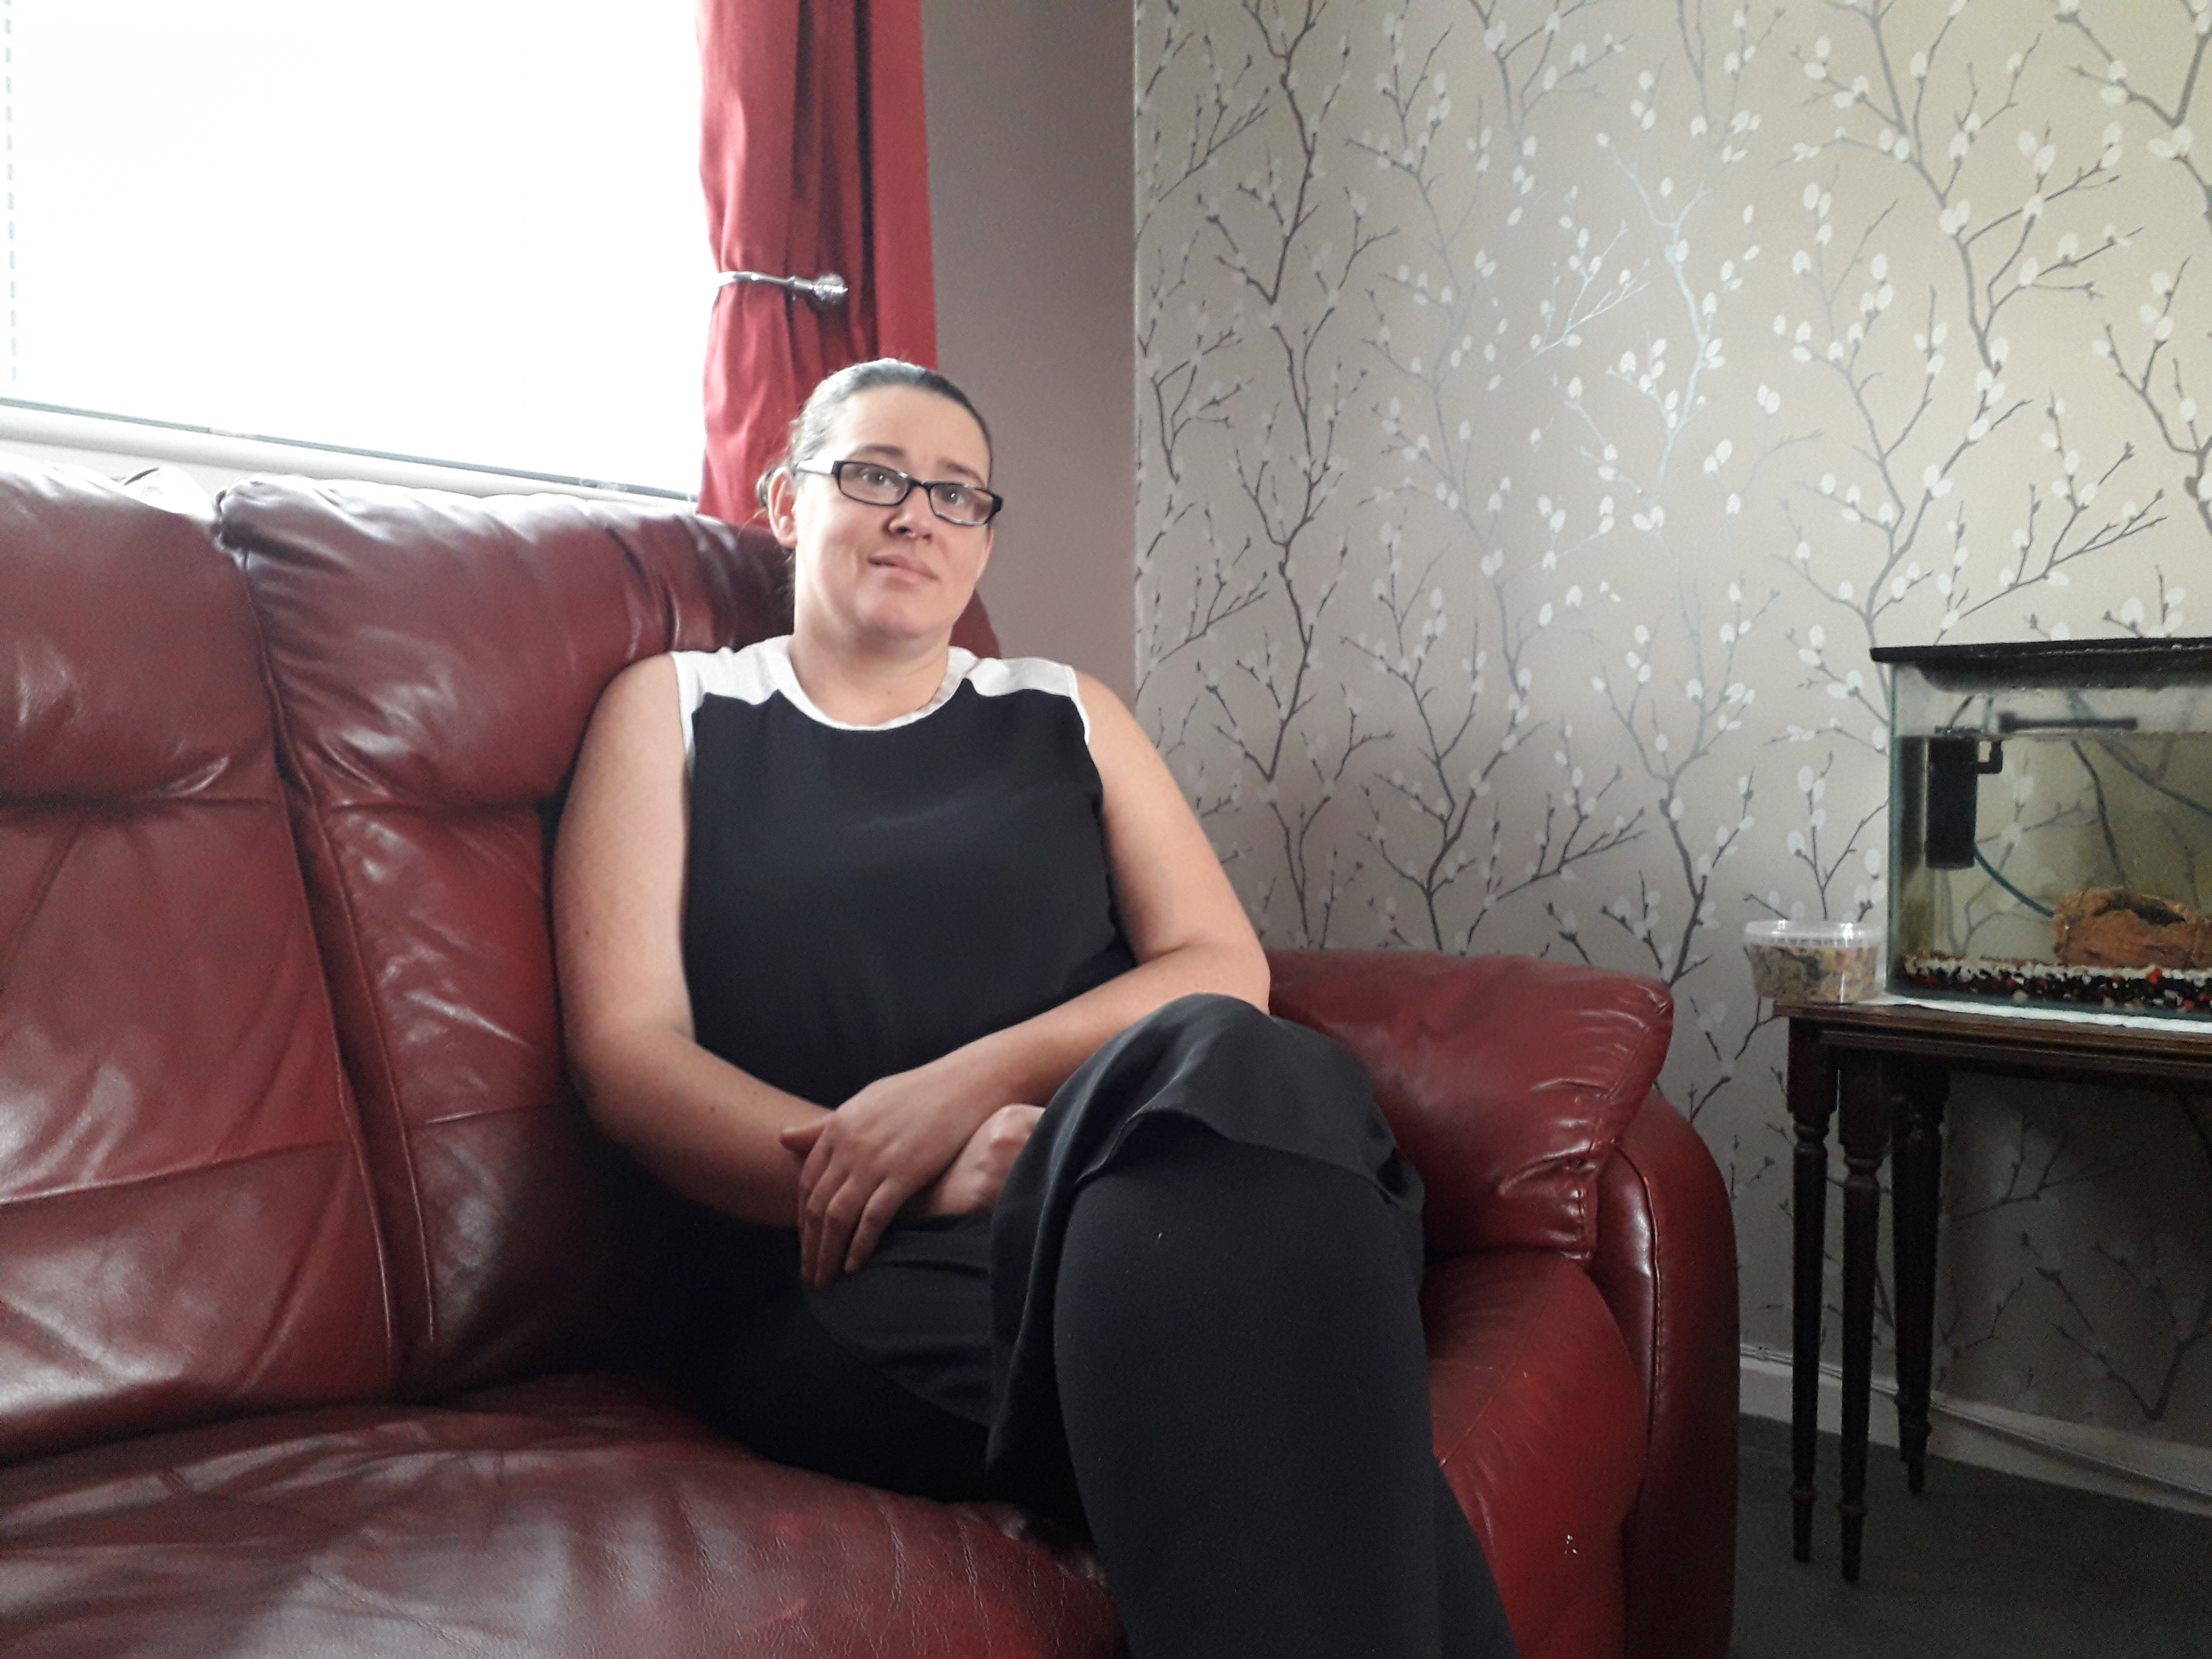 Michelle Melvile, a mother-of-two from Kelty, has told how Universal Credit has plunged her into debt. 
She has issued her heartfelt thanks to Fife Gingerbread who have been supporting her during her ordeal.